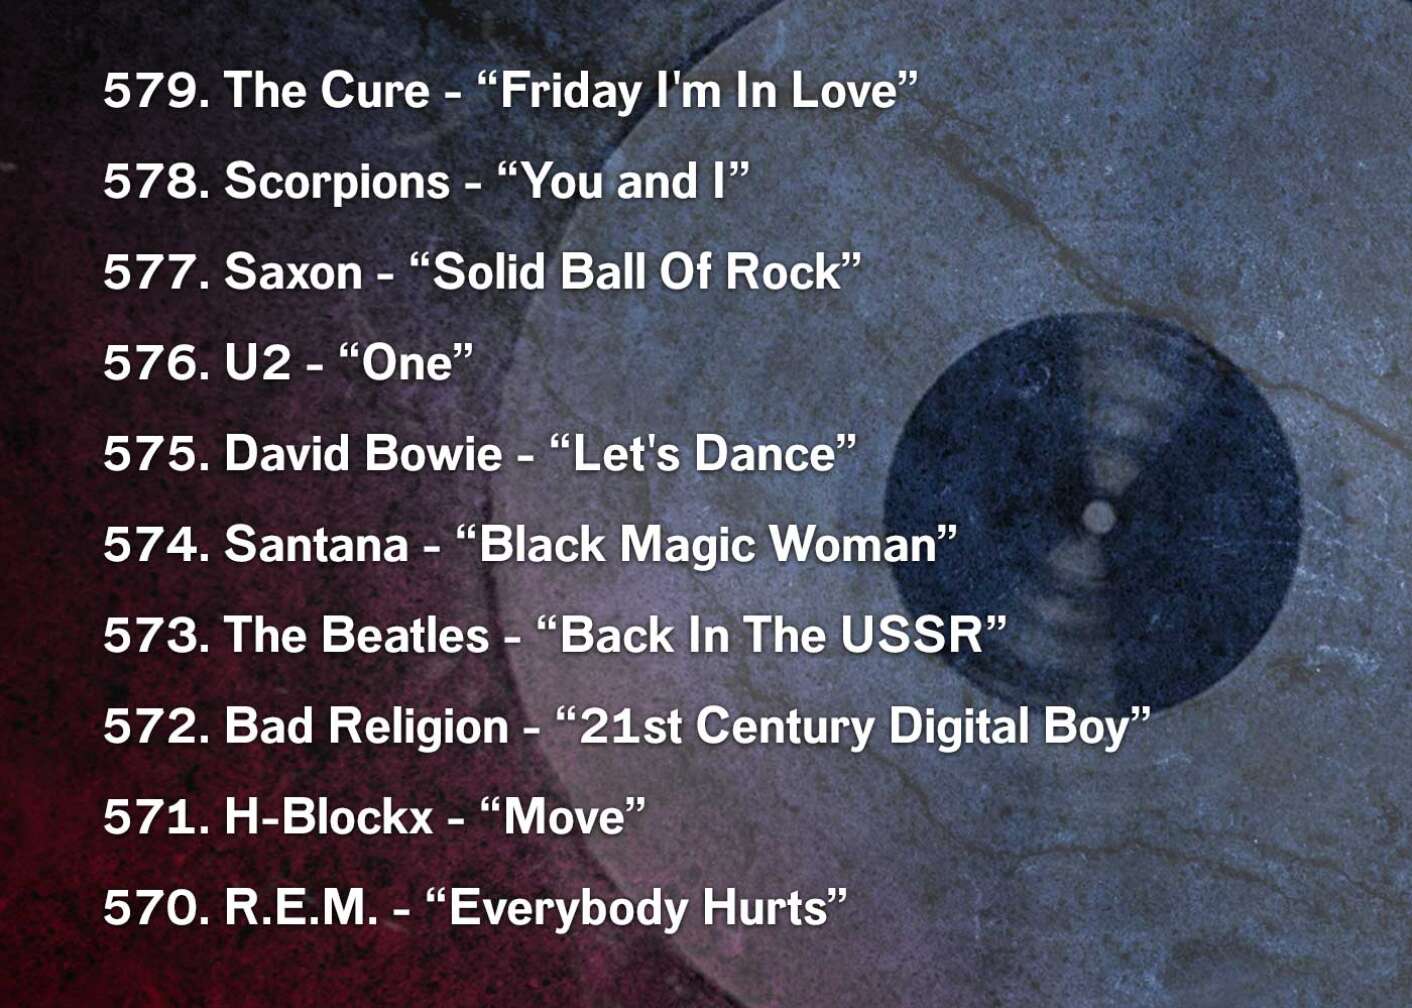 579. The Cure - “Friday I'm In Love” 578. Scorpions - “You and I” 577. Saxon - “Solid Ball Of Rock” 576. U2 - “One” 575. David Bowie - “Let's Dance” 574. Santana - “Black Magic Woman” 573. The Beatles - “Back In The USSR” 572. Bad Religion - “21st Century Digital Boy” 571. H-Blockx - “Move” 570. R.E.M. - “Everybody Hurts”